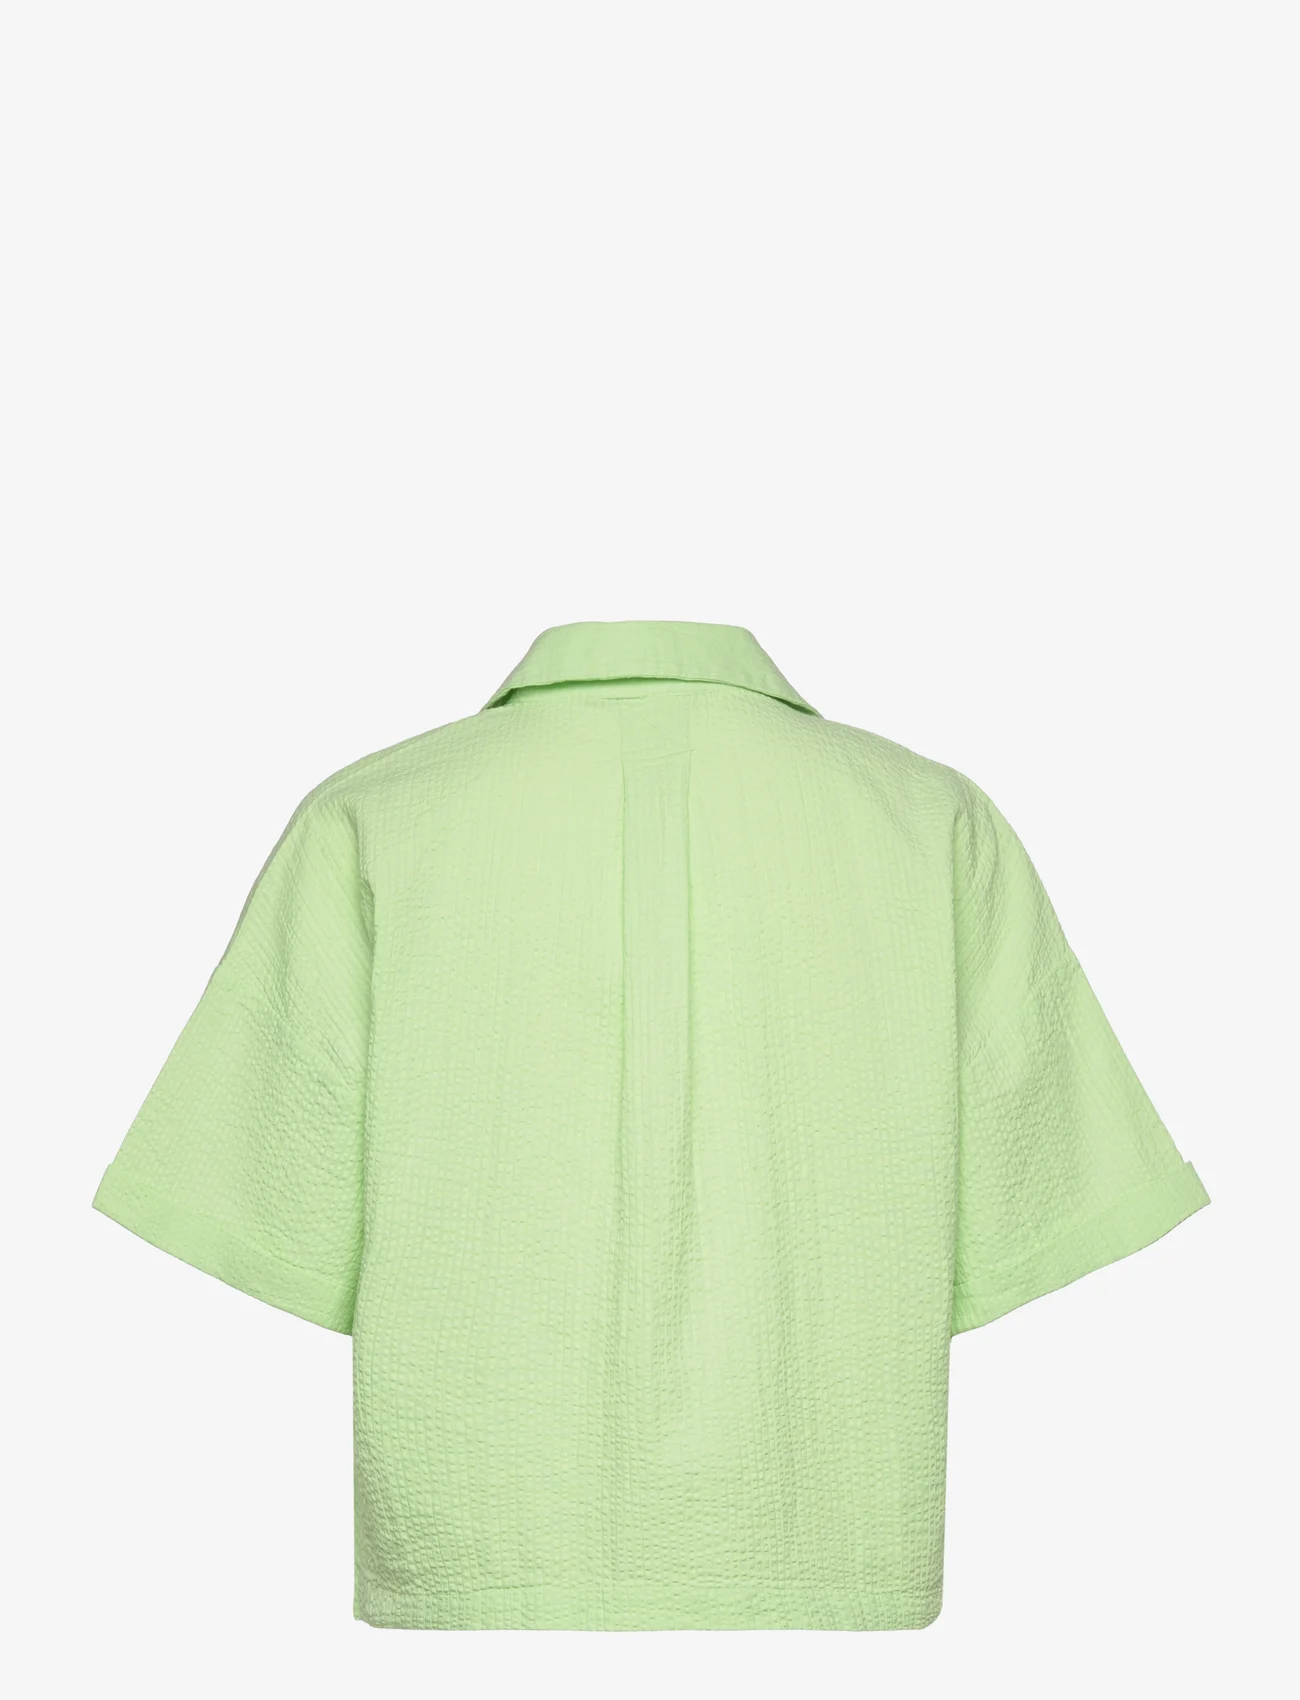 Pieces - PCKIANA SS SHIRT BC - lowest prices - paradise green - 1